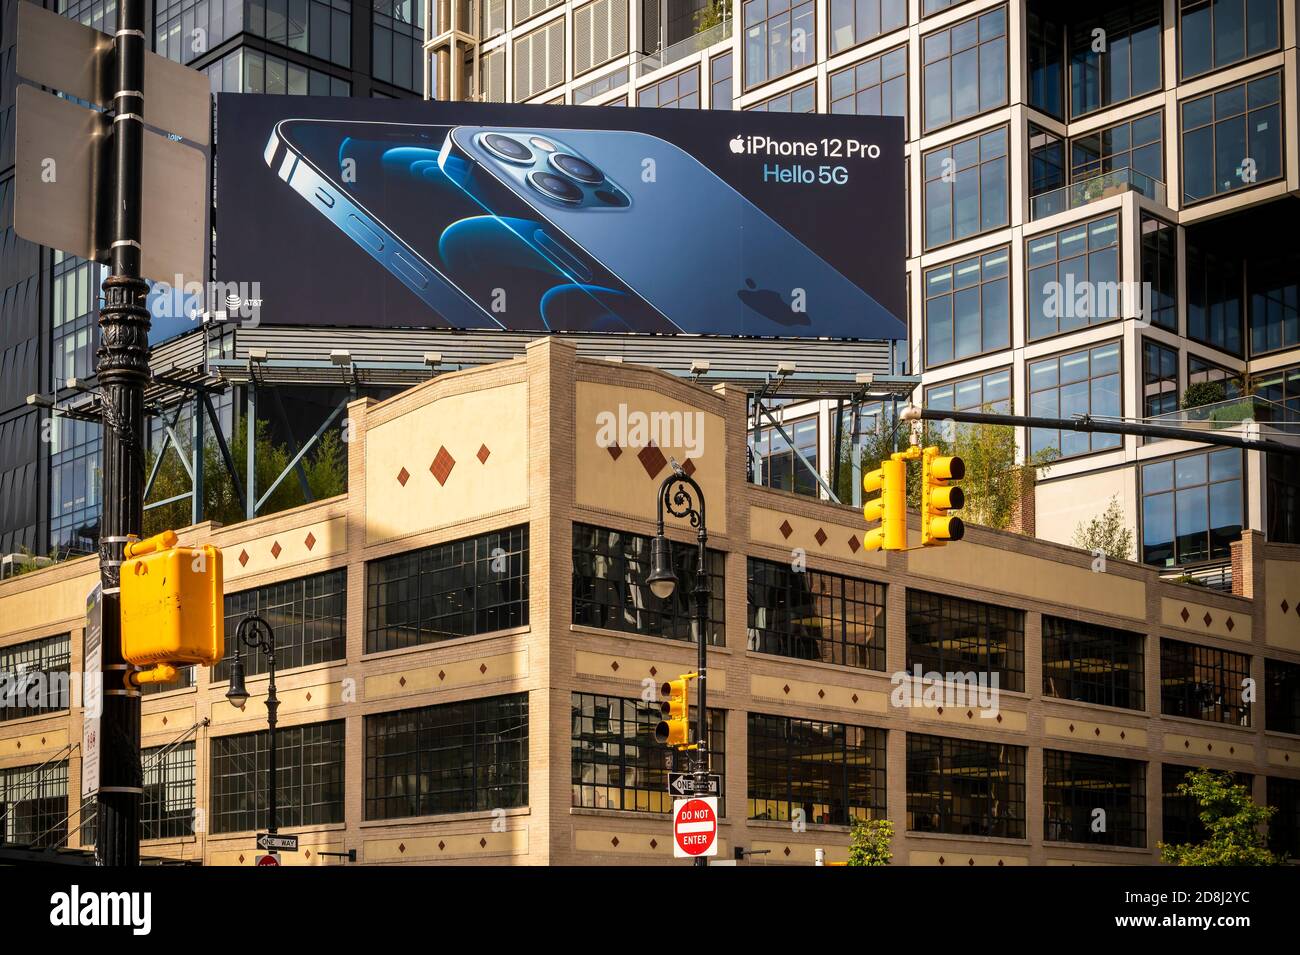 A billboard above the Apple store in the Meatpacking District of New York on Friday, October 23, 2020 the day the new iPhone 12 Pro goes on sale.   (© Richard B. Levine) Stock Photo